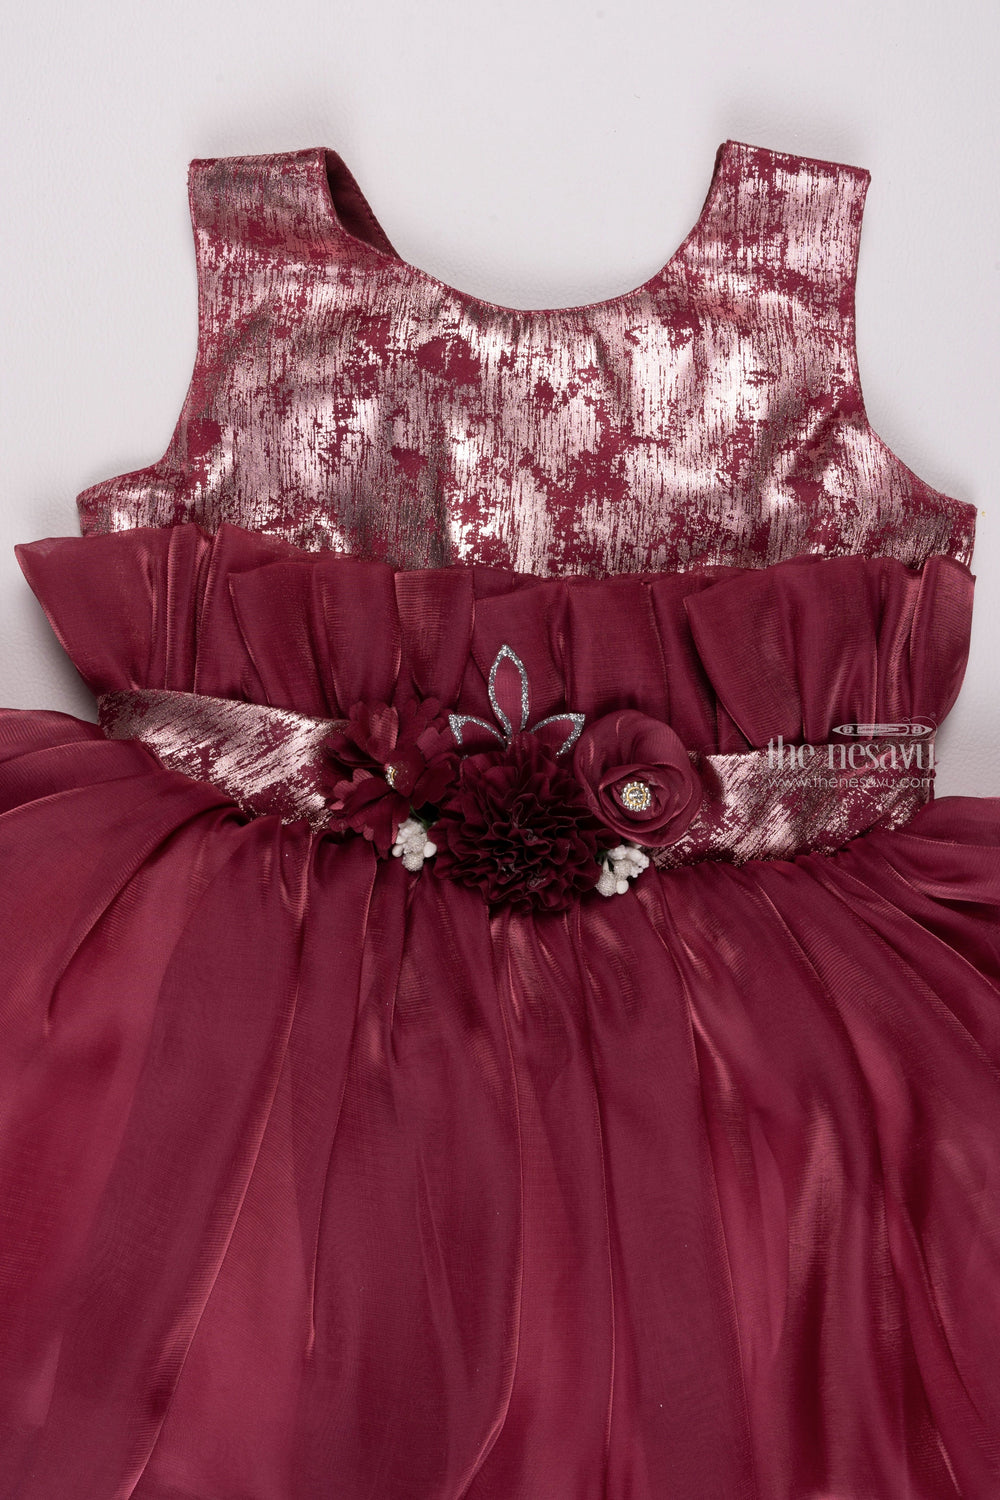 The Nesavu Girls Fancy Party Frock Ruby Radiance: Designer Foil-Printed Pleated Frock with Floral Applique in Organza Nesavu Mermaid Birthday Outfits: Trendy & Stylish Floral Embellished Baby Girl Frocks | The Nesavu